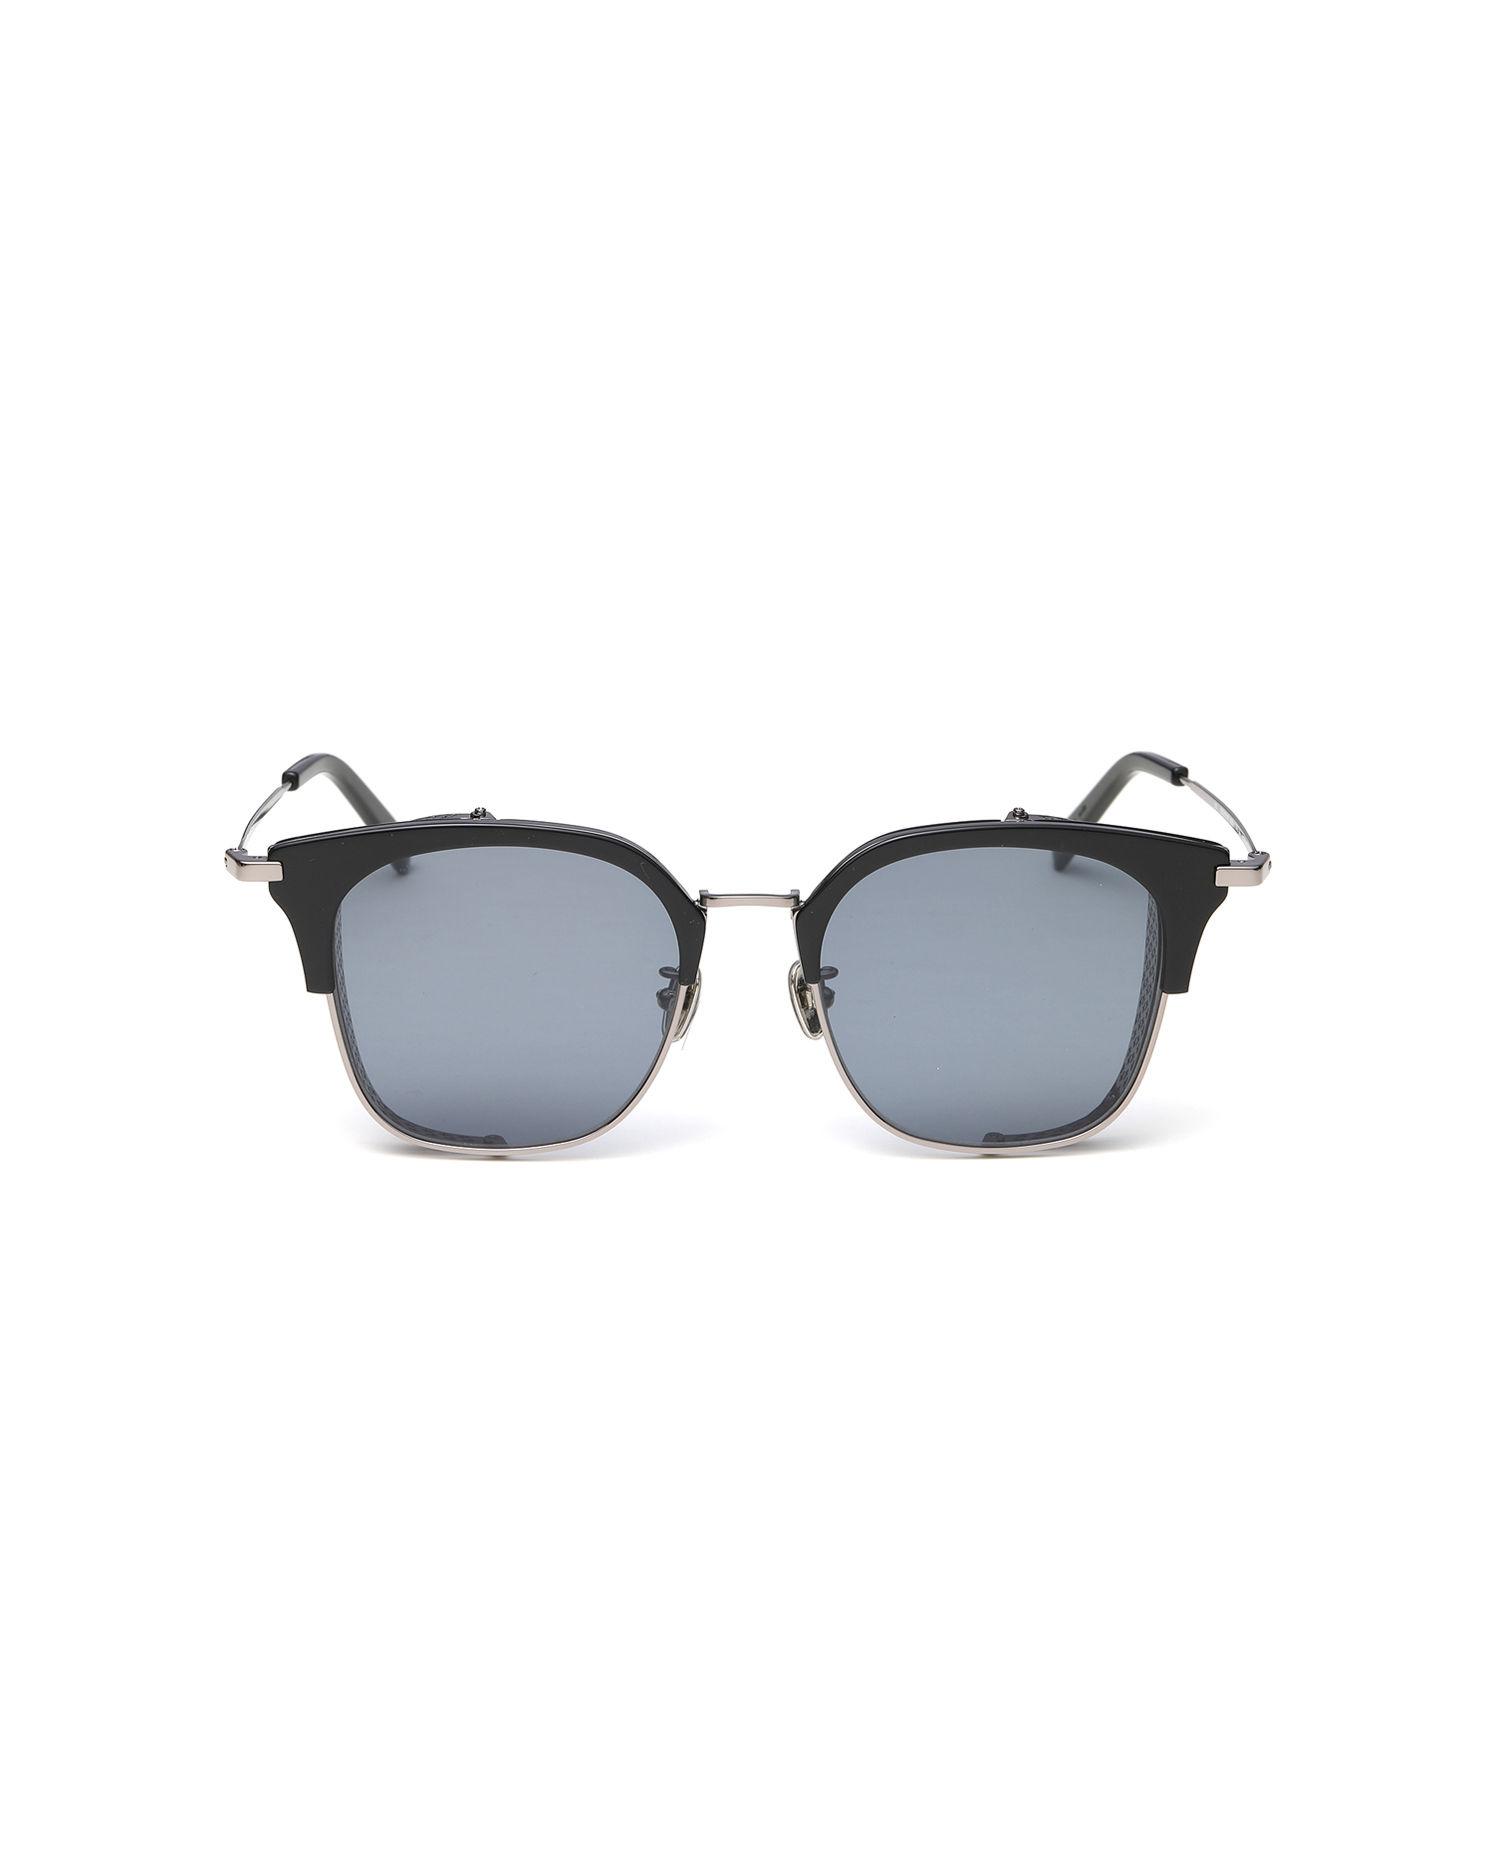 Clubmaster sunglasses by 4ARMY